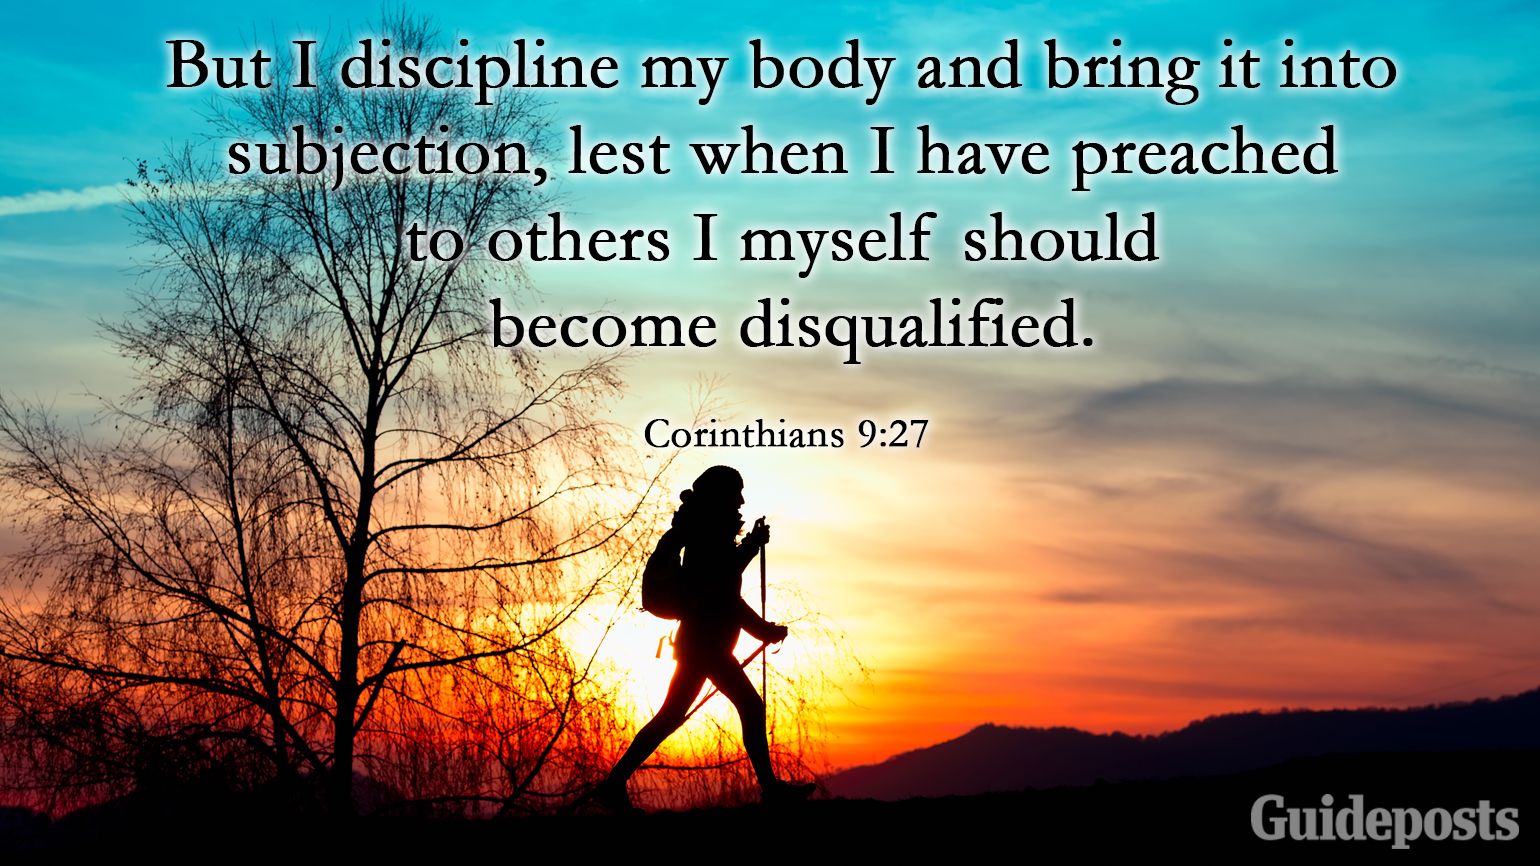 “But I discipline my body and bring it into subjection, lest when I have preached to others I myself should become disqualified.”